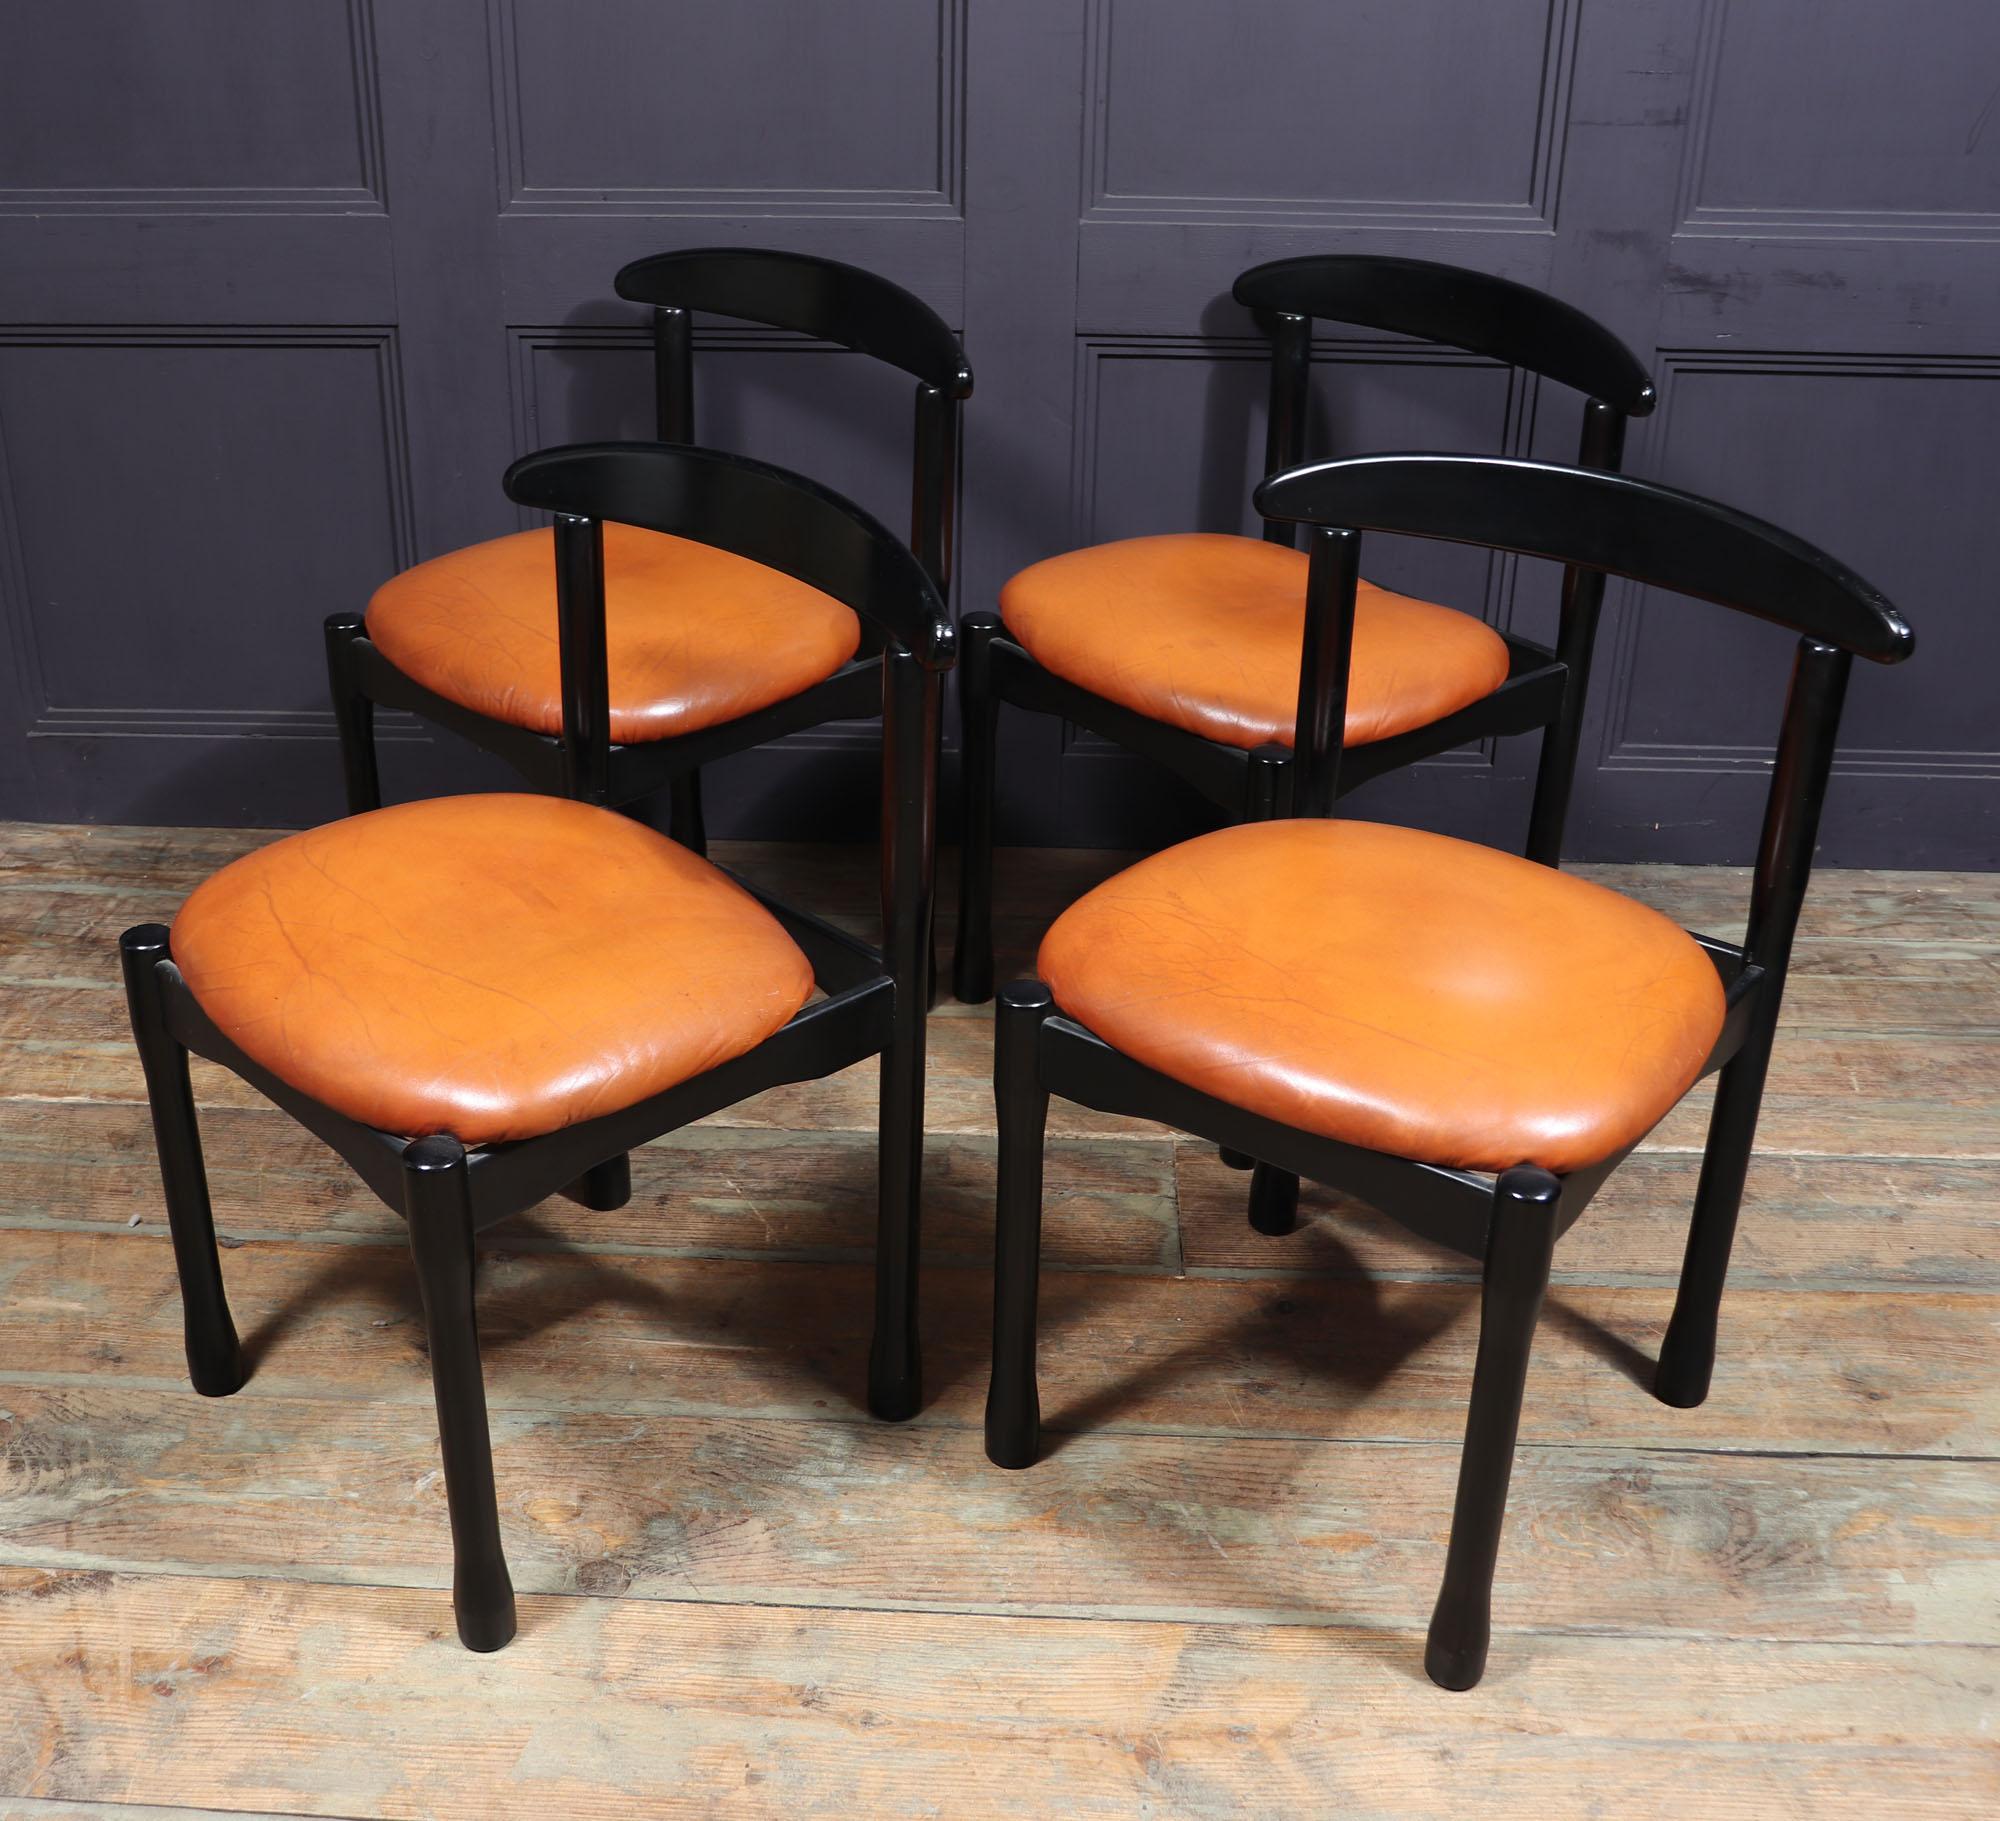 Mid century Italian dining chairs
This set of four Italian dining chairs is an iconic piece of mid-century design by renowned architect and designer Vico Magistretti. Crafted from ebonised wood, these striking chairs feature a curved backrest that